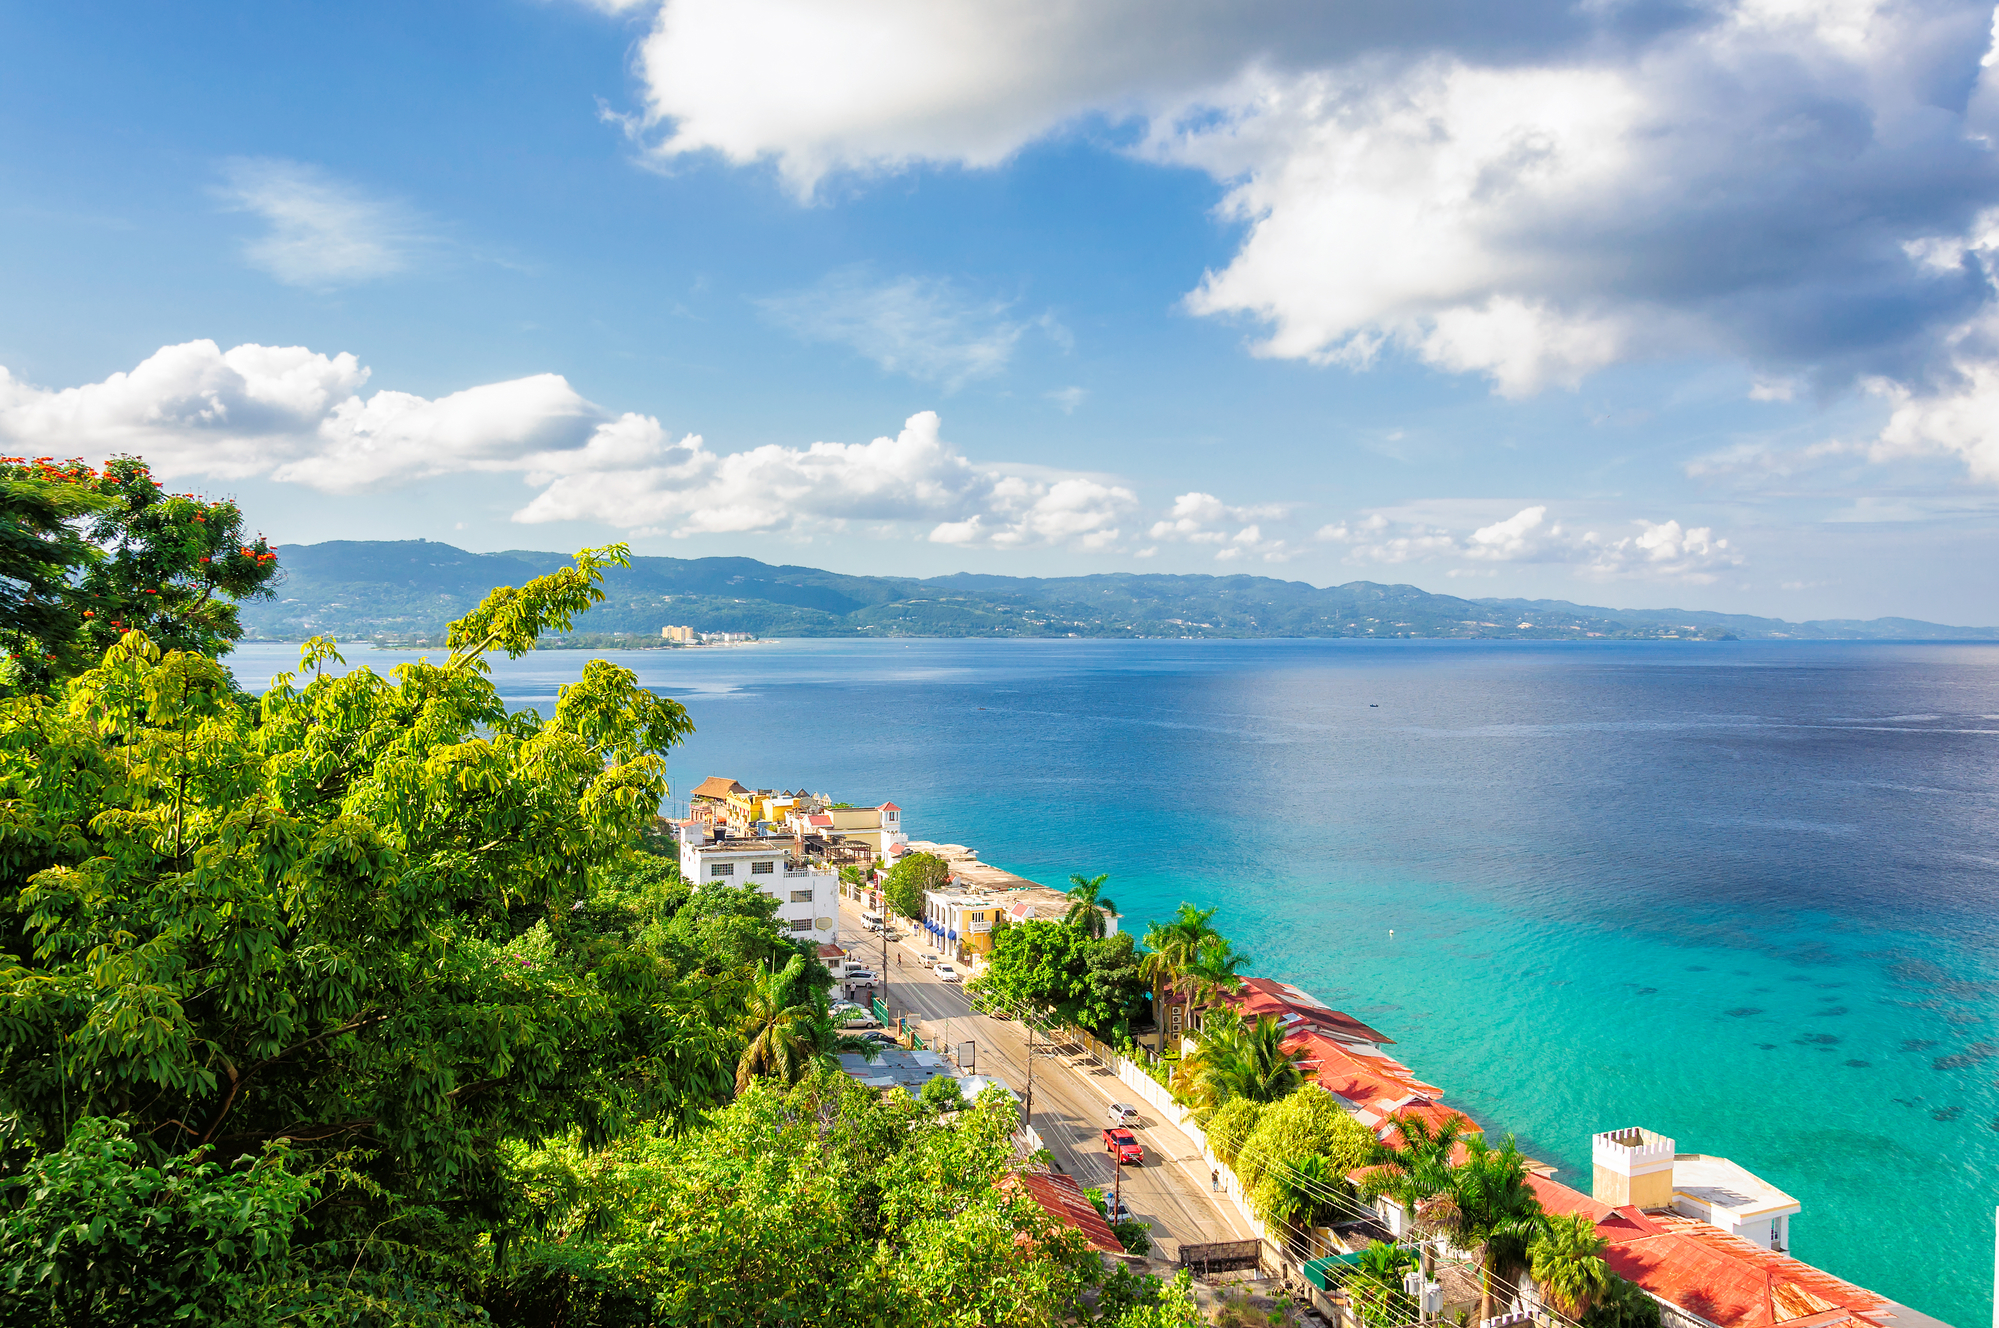 Things to do in Montego Bay